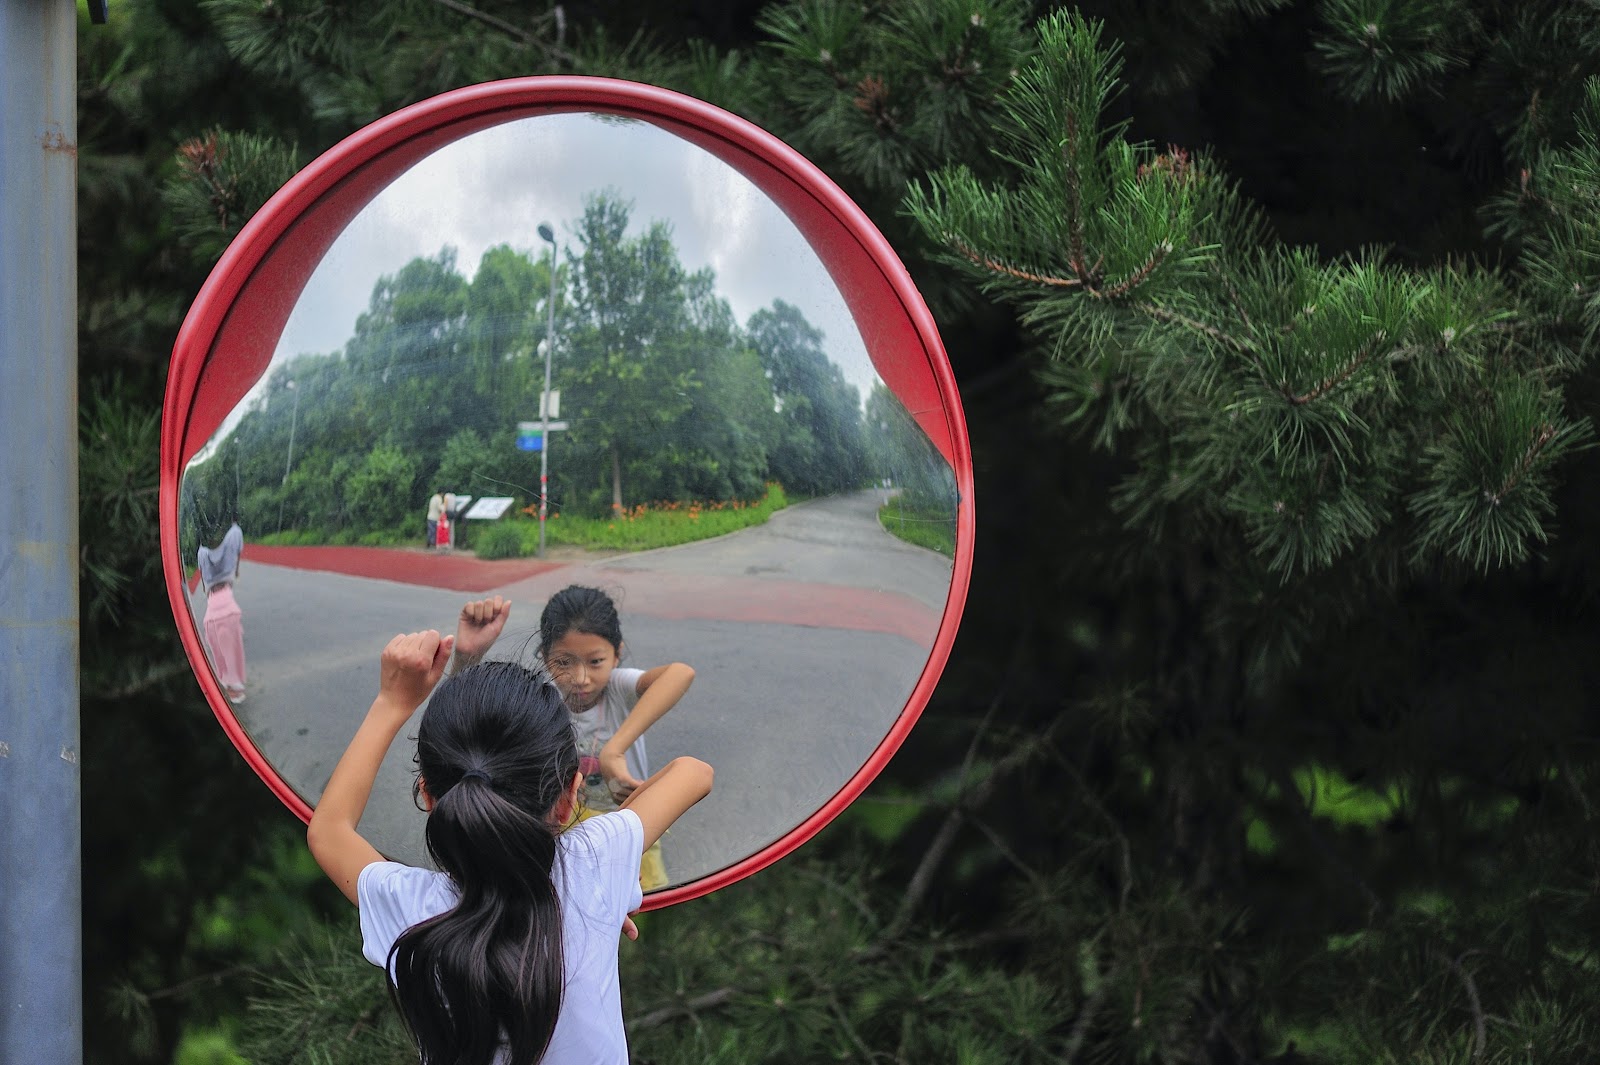 A convex mirror, used in road, bends,  which is used to prevent accident. A child is seeing her reflection in the convex mirror placed along the road side